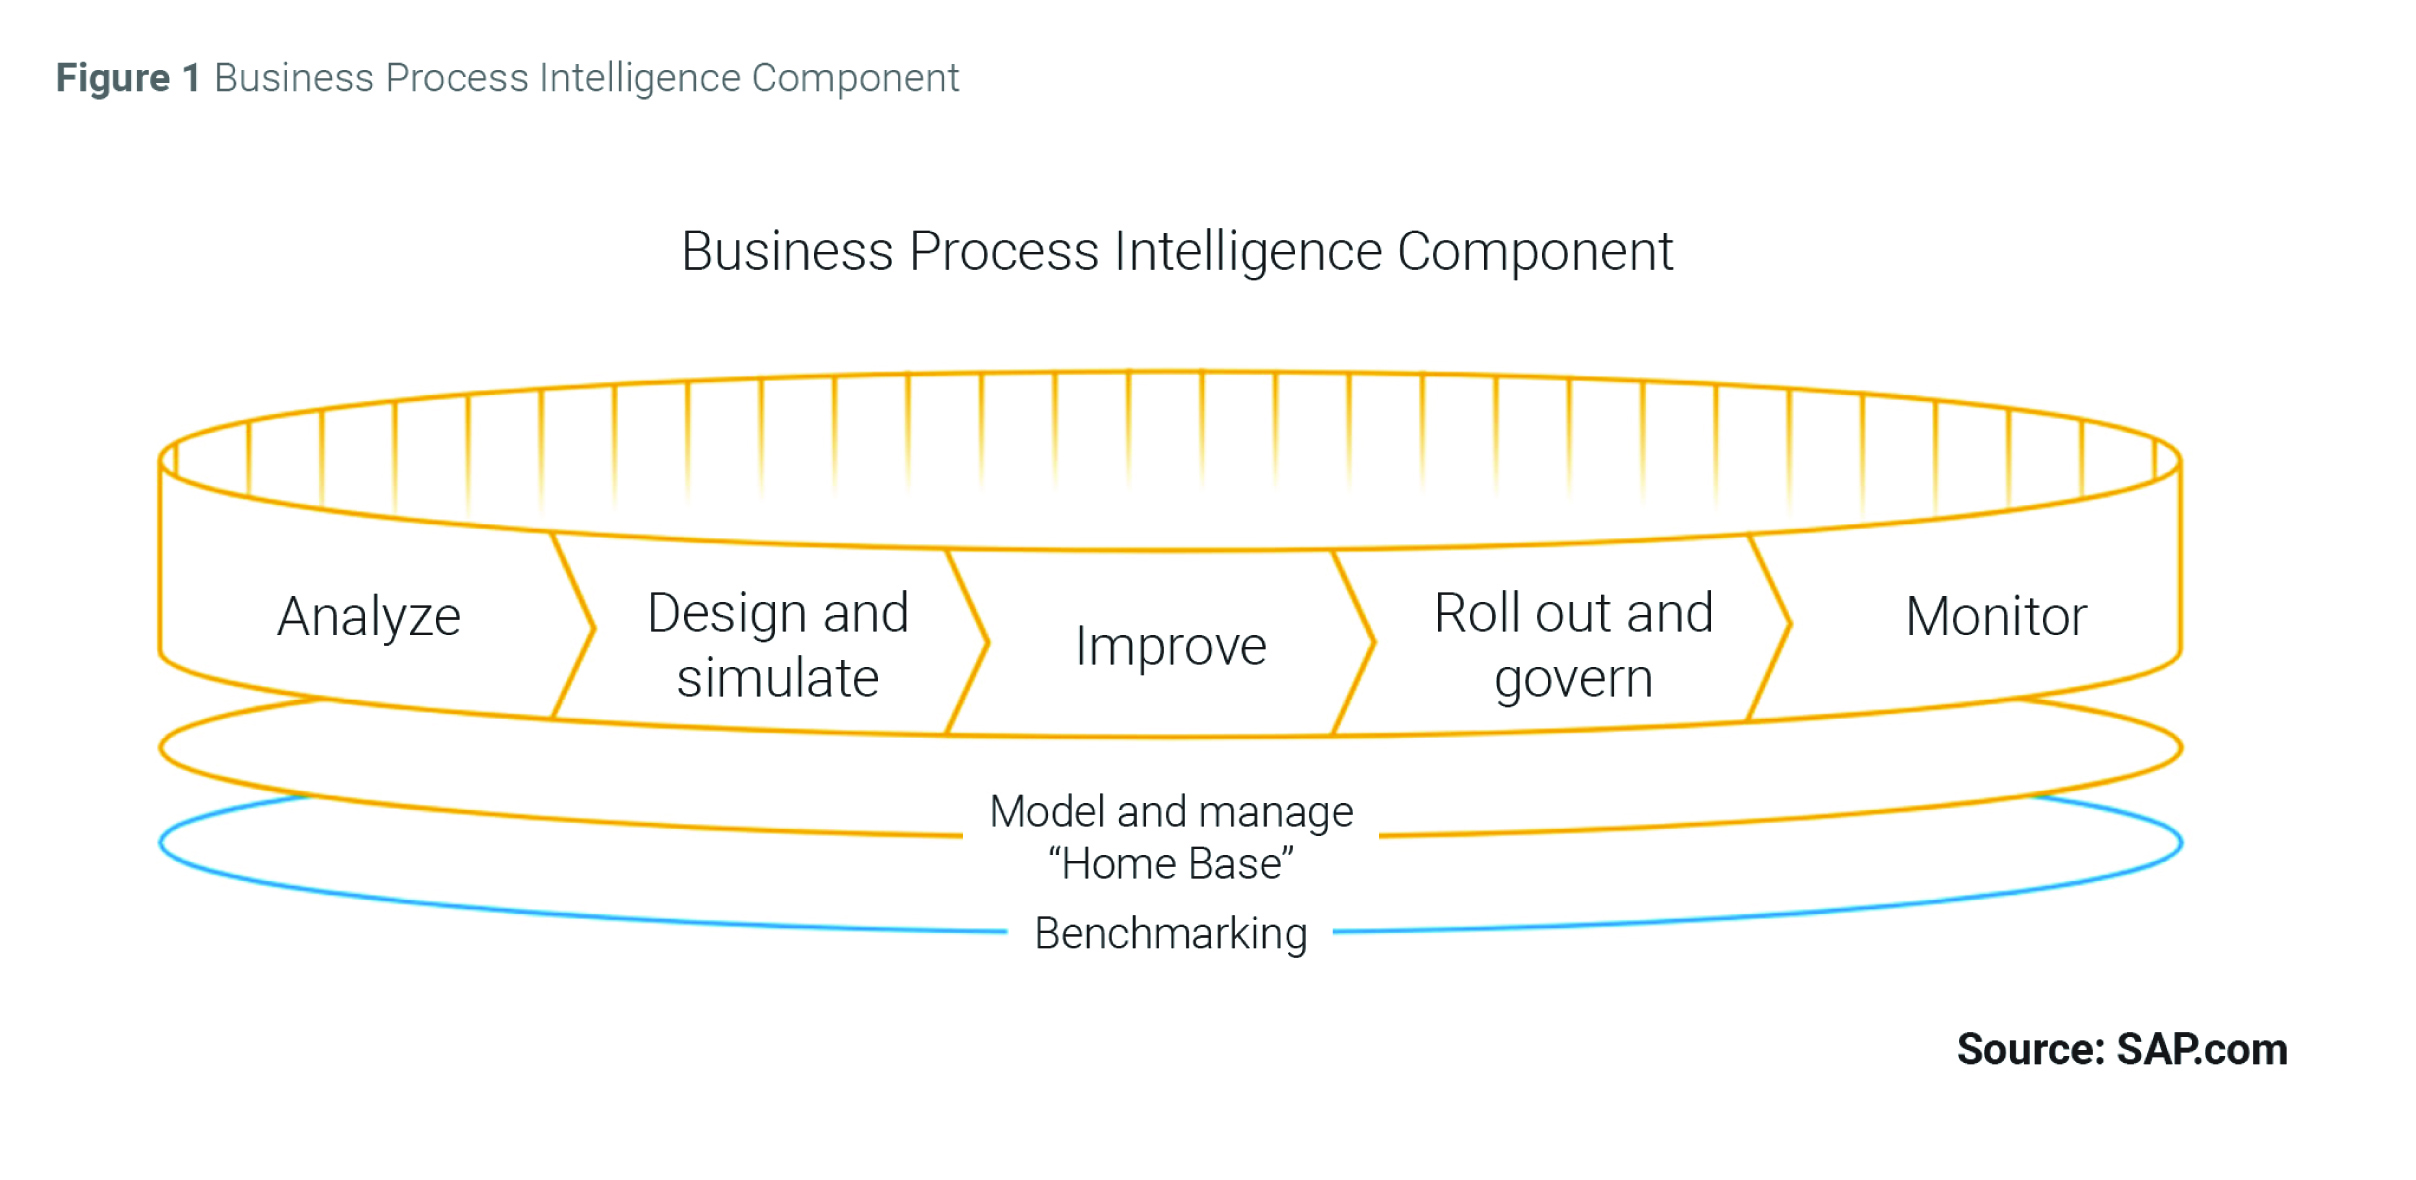 Business Process Intelligence Component